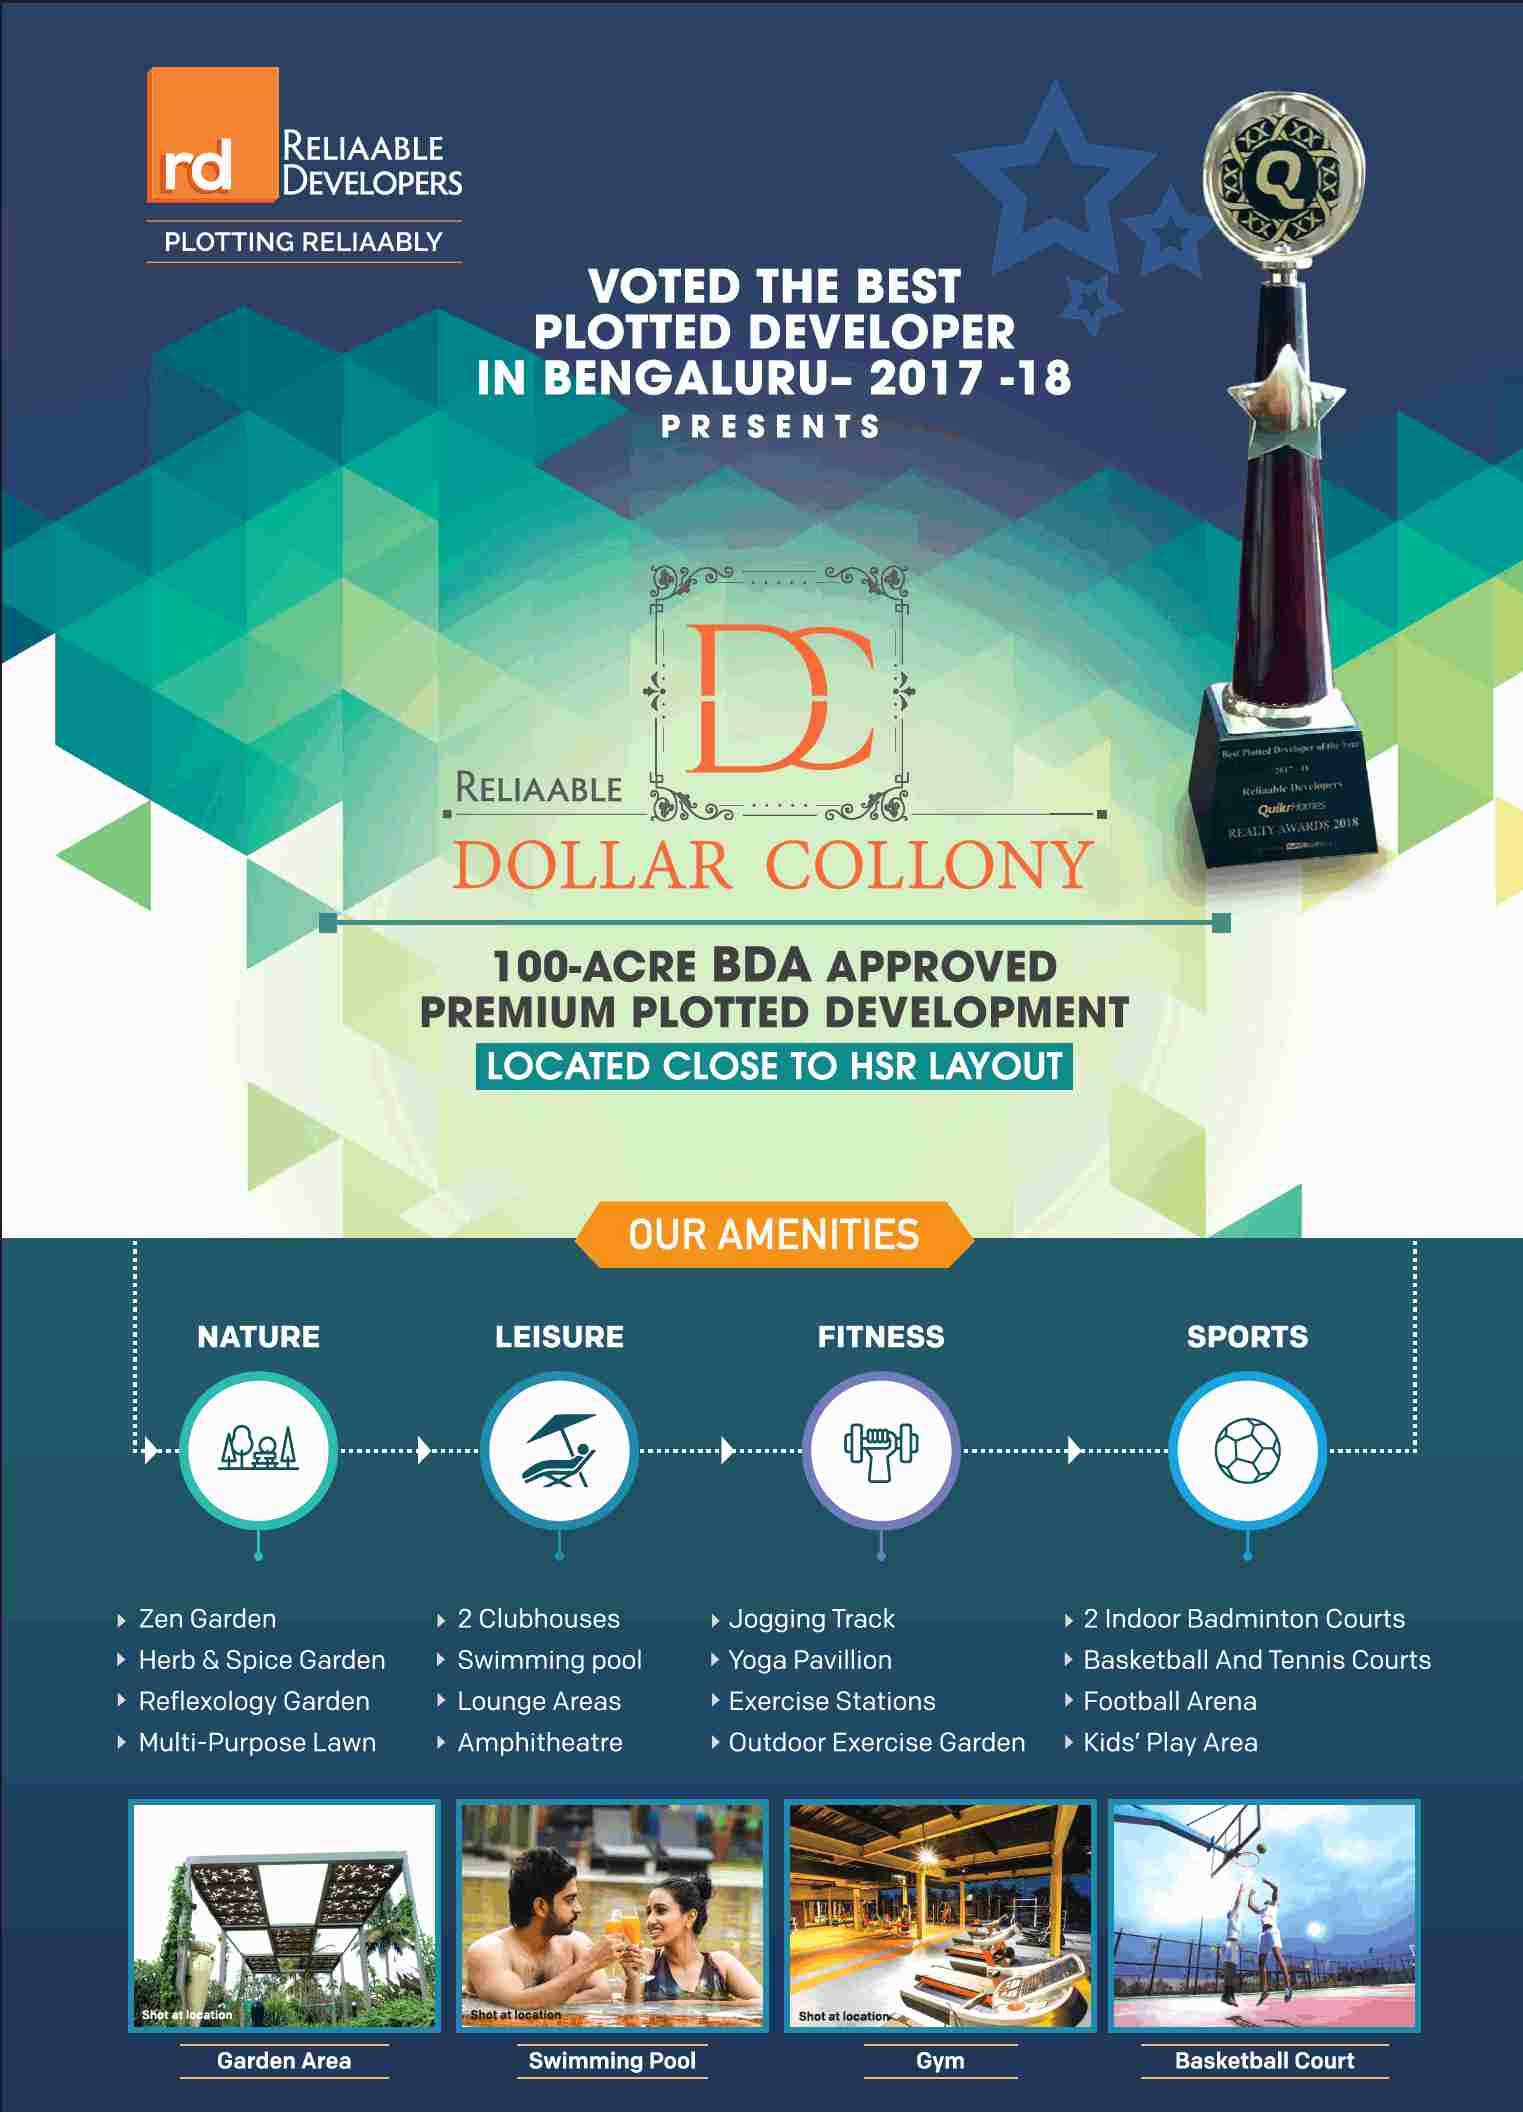 Reside in premium plotted development at Reliaable Dollar Collony in Bangalore